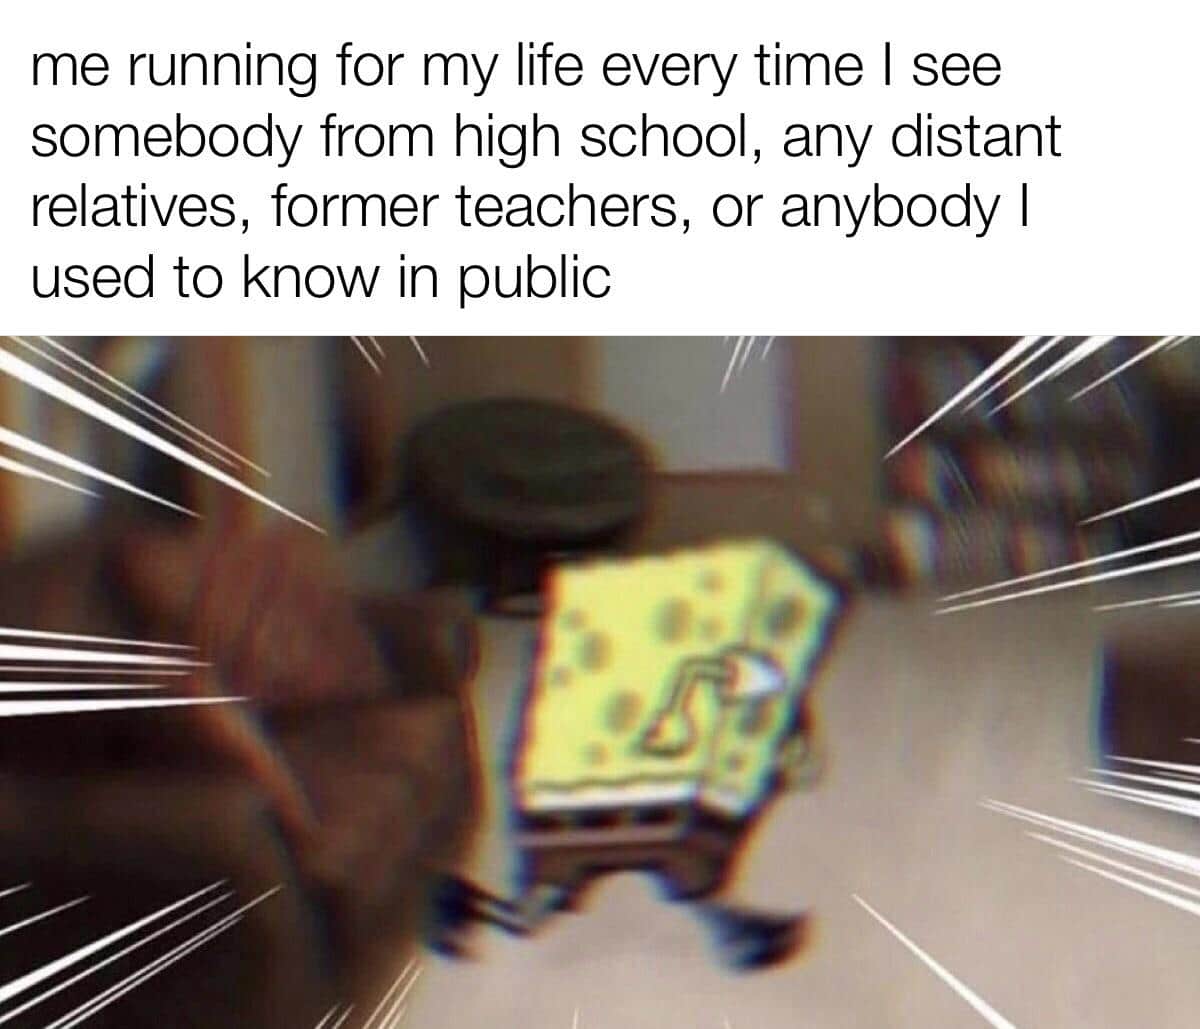 Spongebob, Utterly Spongebob Memes Spongebob, Utterly text: me running for my life every time I see somebody from high school, any distant relatives, former teachers, or anybody I used to know in public 